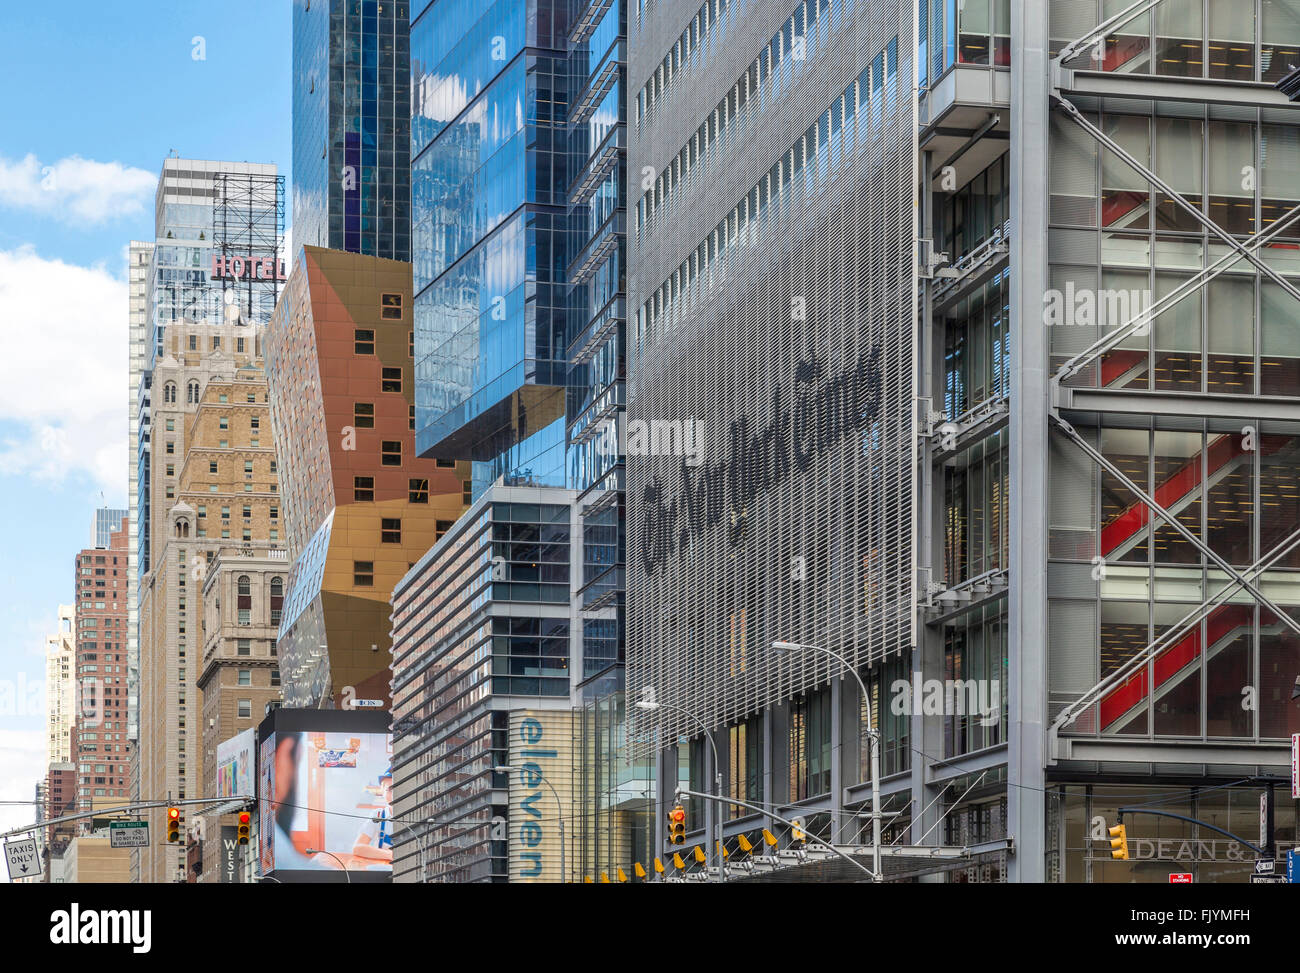 Renzo Piano's New York Times Tower, with Arquetectonica's Westin Hotel behind. Stock Photo